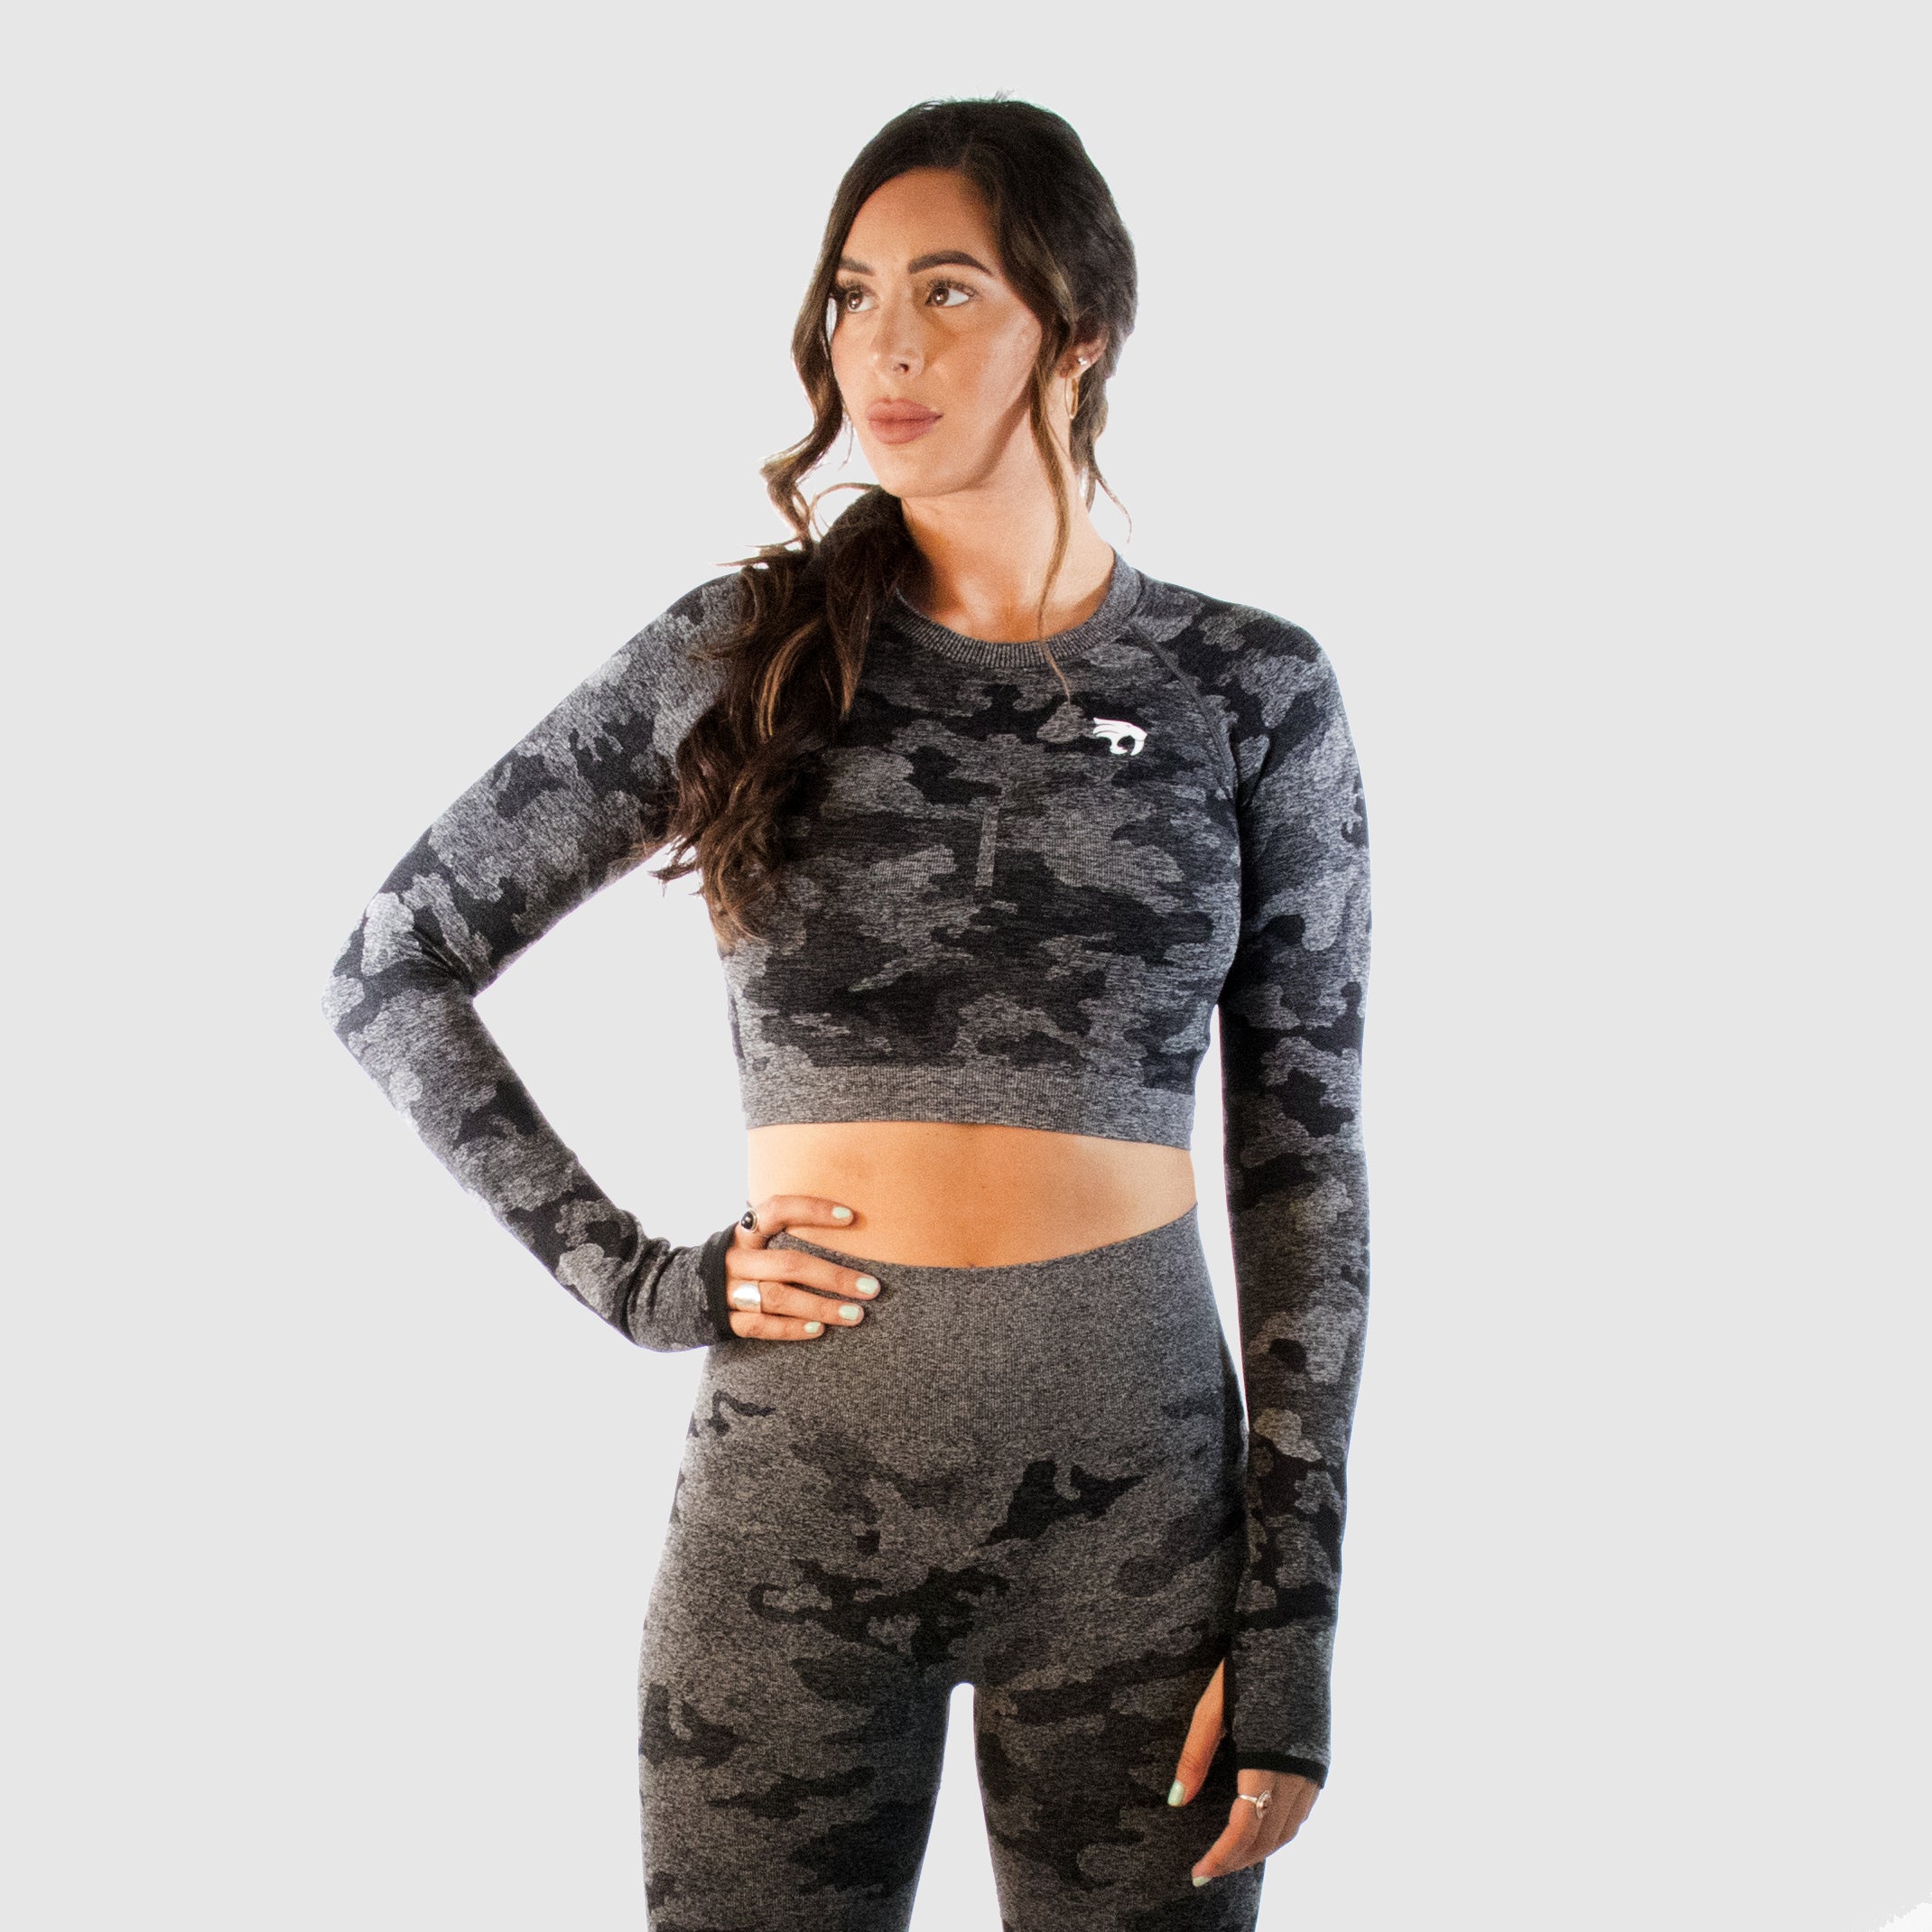 Gym Top - Women's Evolve Crop Top for Hitting The Gym and Working